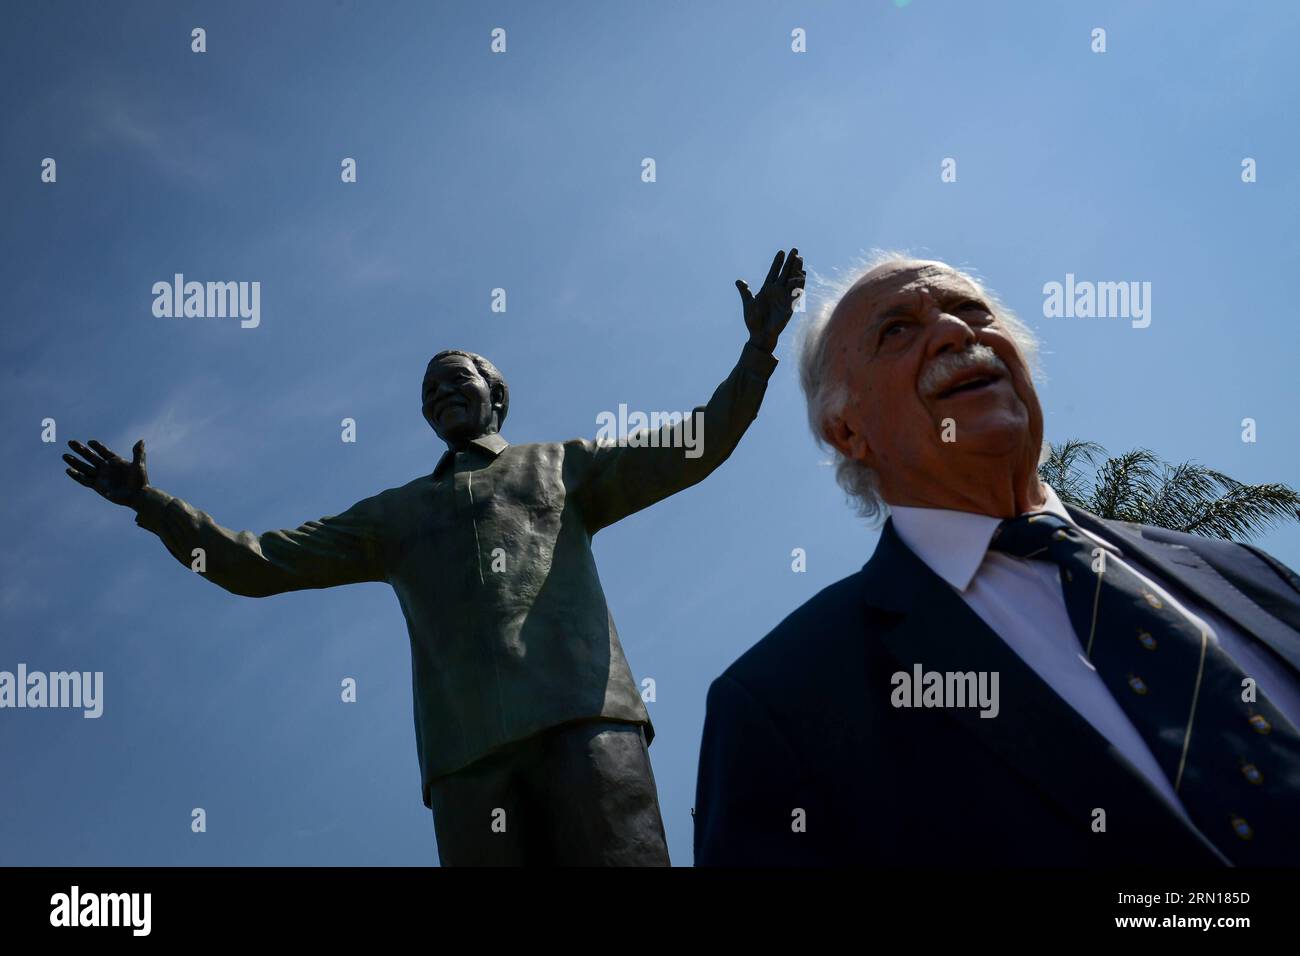 141205 -- PRETORIA, Dec.5, 2014 -- The laywer George Bizos, who helped the Nelson Mandela out of prison, stands before the Mandela statue in the Union Buildings, Pretoria, South Africa, on Dec.5, 2014. A wreath laying ceremony was held here Friday to mark the 1st anniversary of late South Africa s President Nelson Mandela s passing. South Africa s veterans of the struggle for freedom and those who fought with Nelson Mandela against apartheid were invited to lead the wreath laying.  SOUTH AFRICA-PRETORIA-MANDELA-1ST ANNIVERSARY-COMMEMORATION ZhaixJianlan PUBLICATIONxNOTxINxCHN Stock Photo